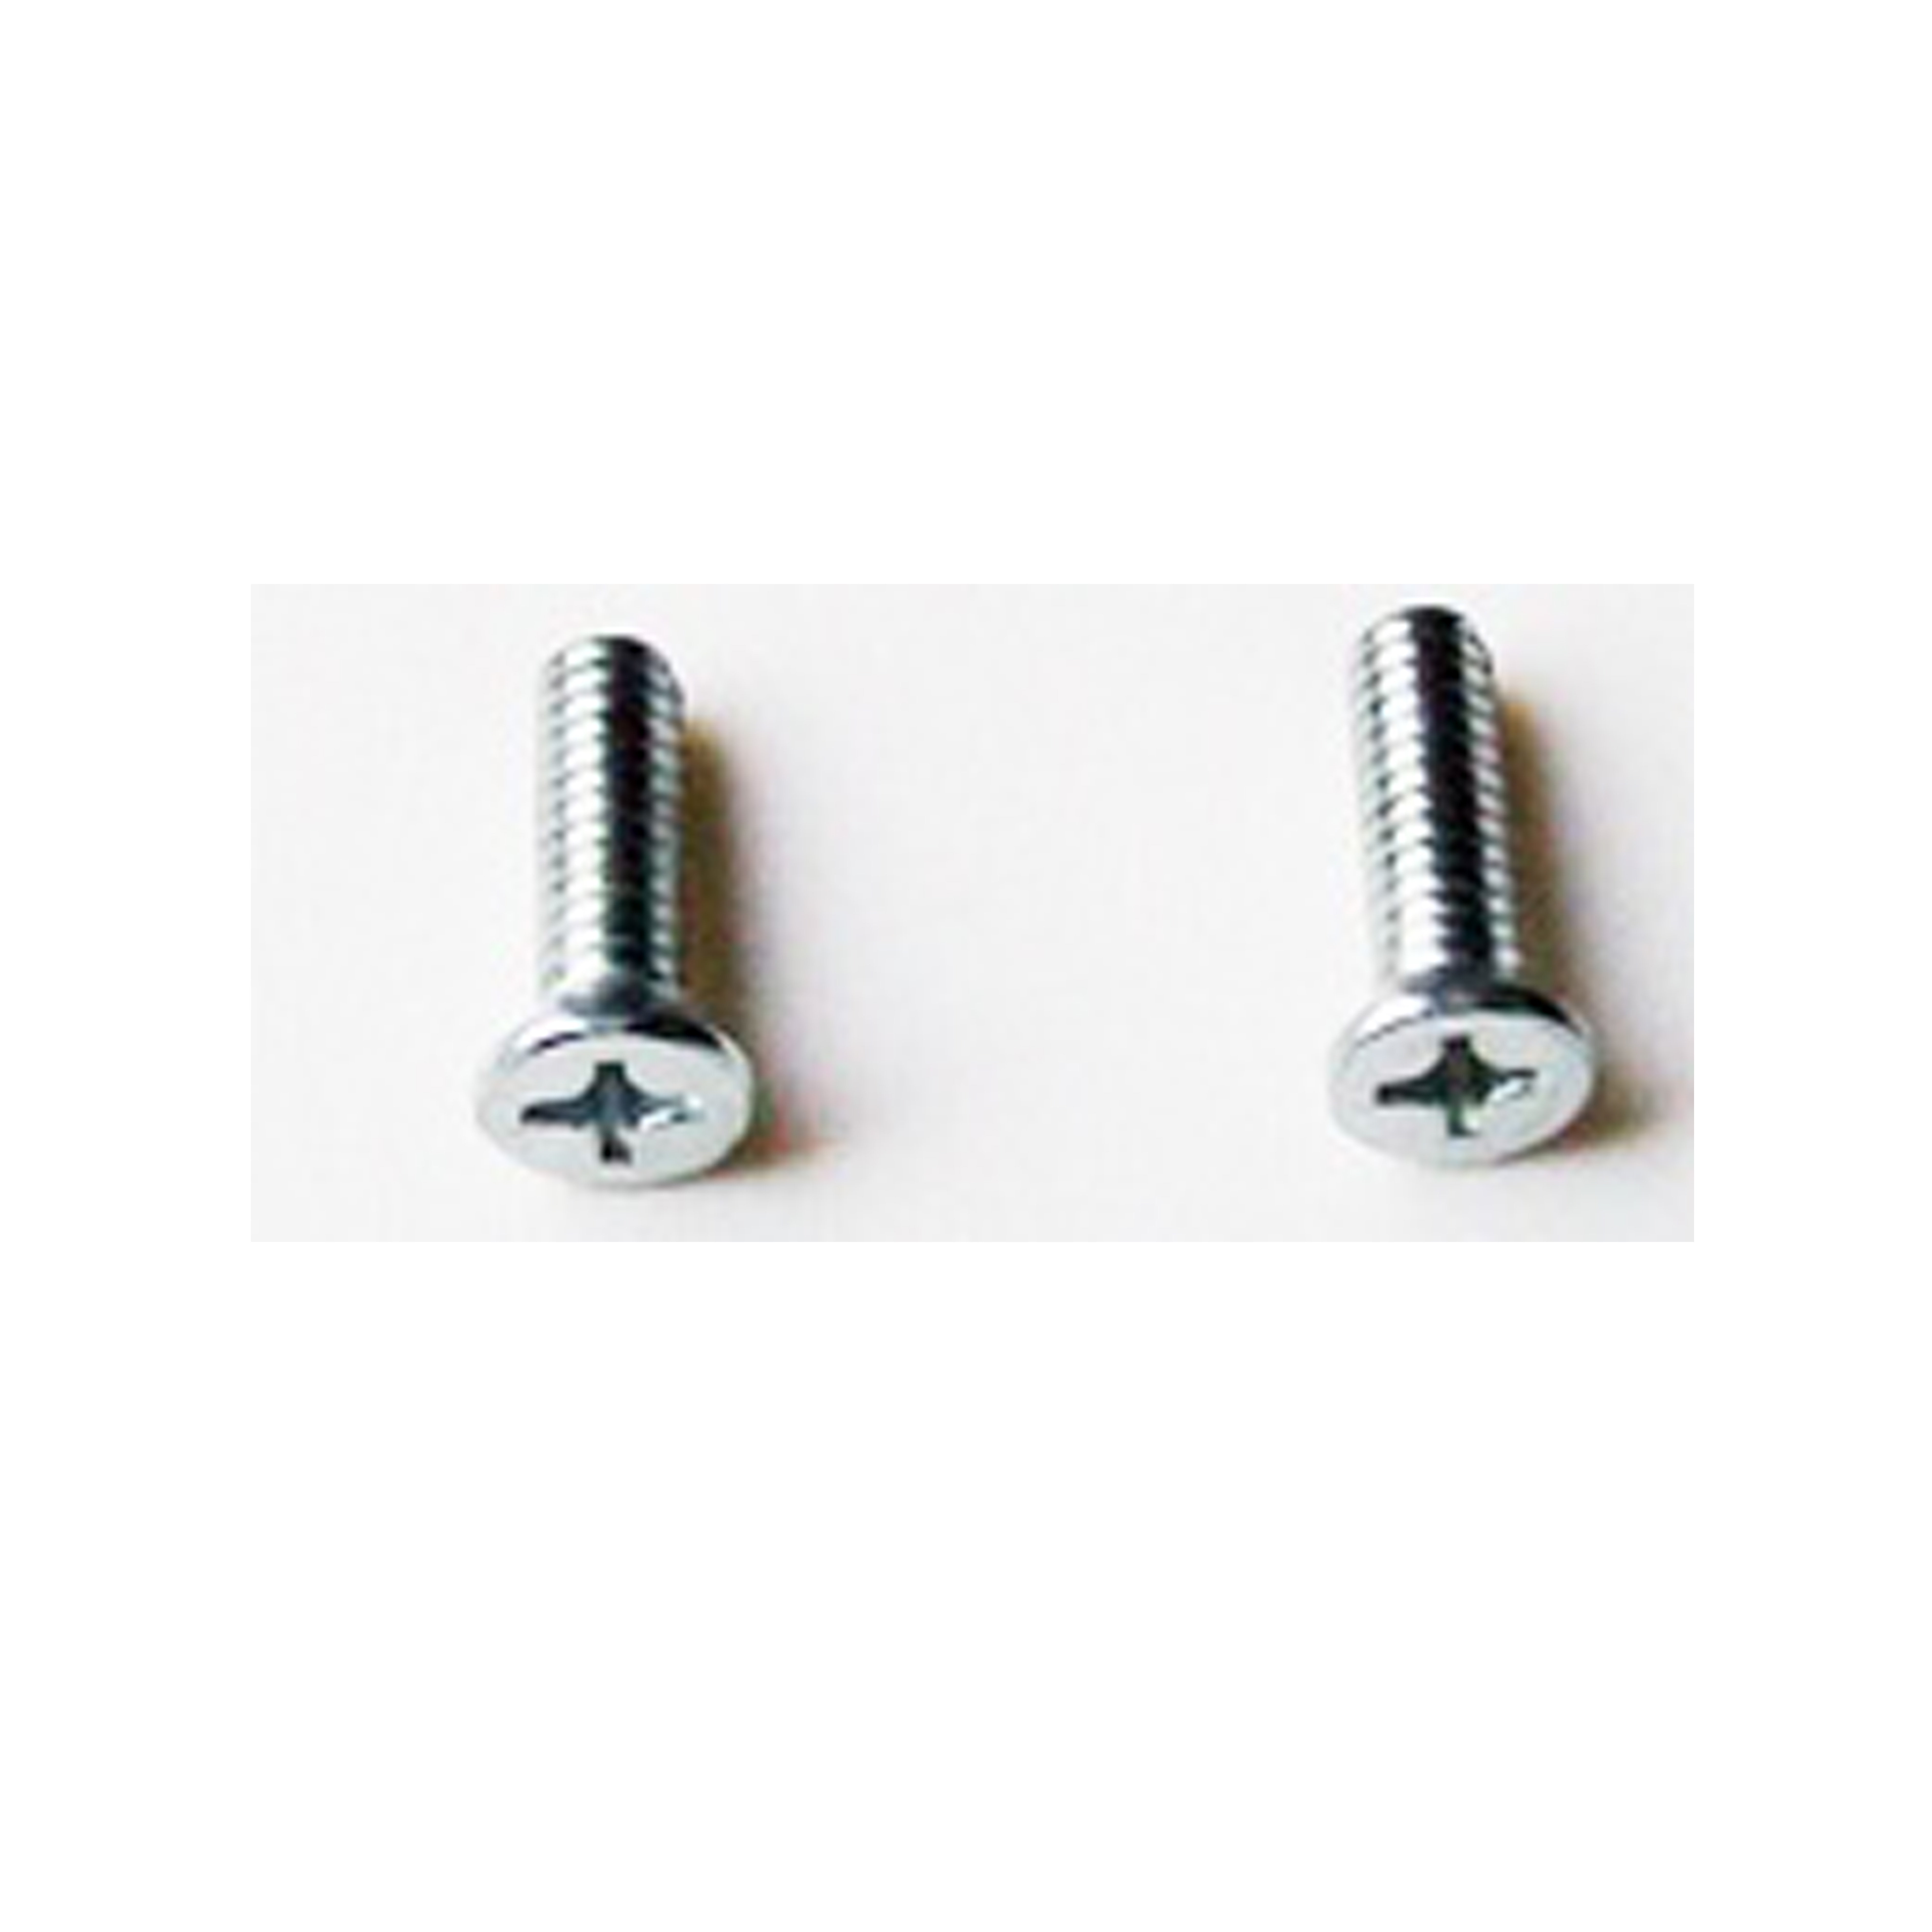 HMS05-ZI Connector Threaded Plate with Screws Zinc